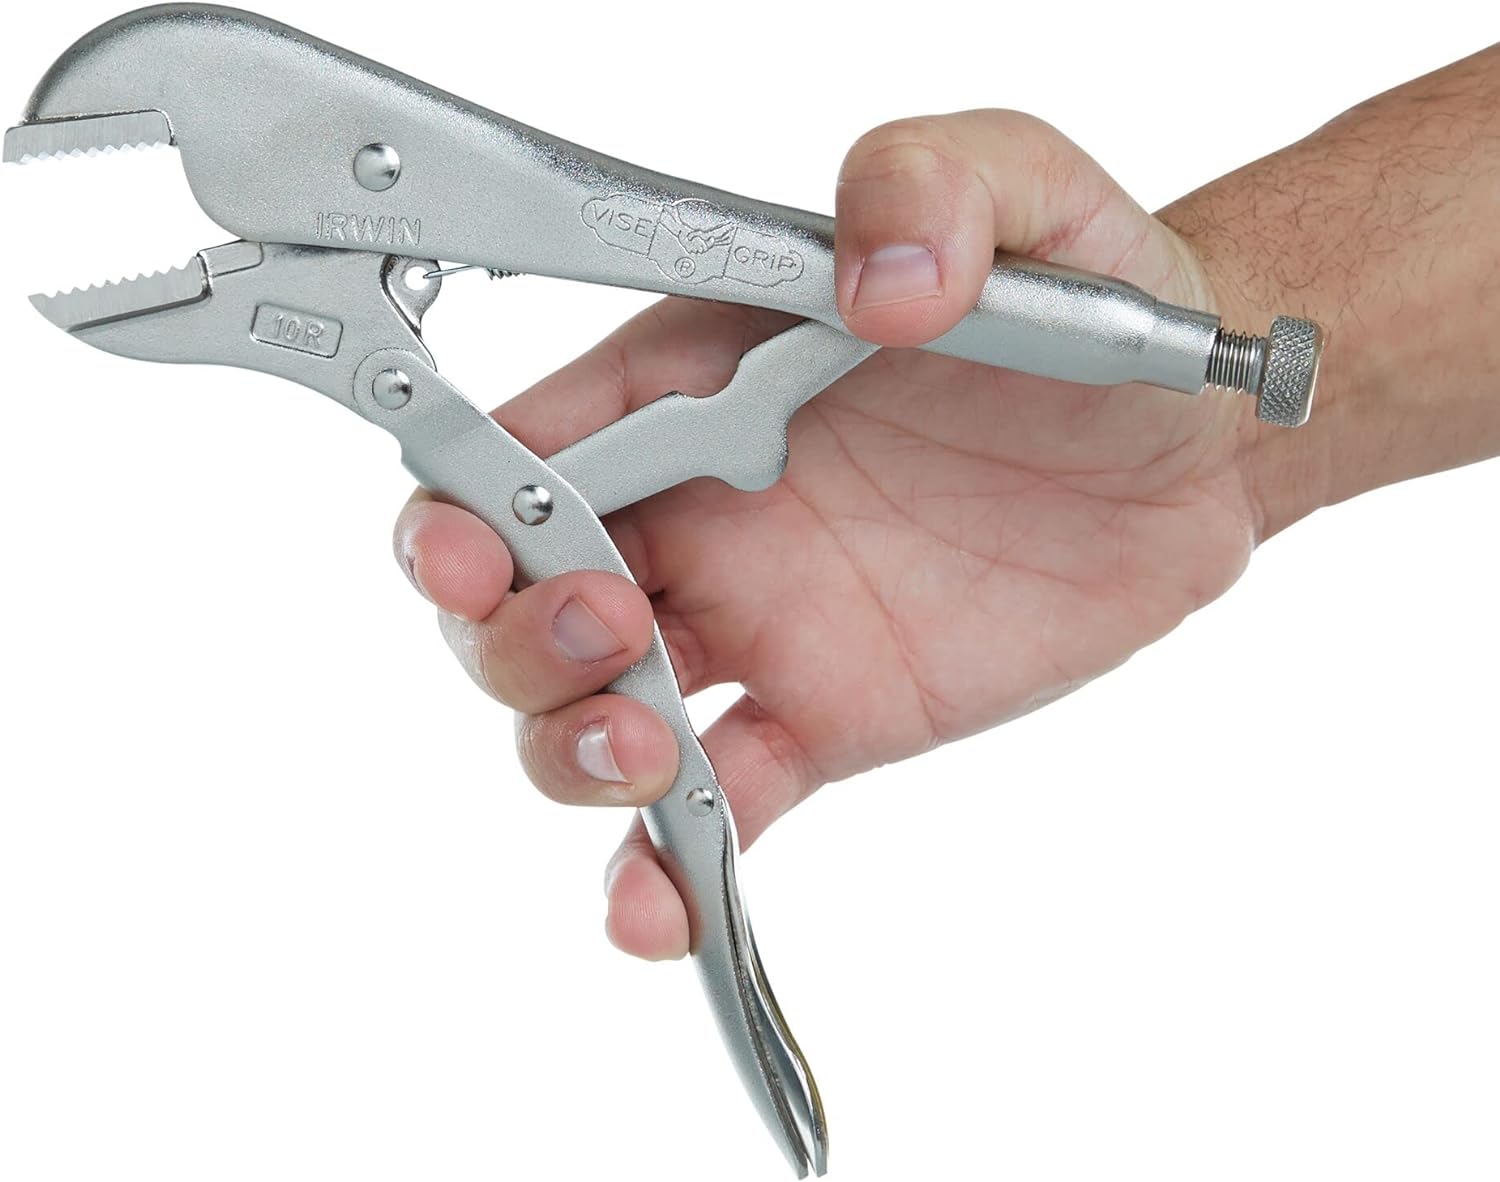 VISE-GRIP Fast Release 10R Straight Jaw Locking Pliers 10